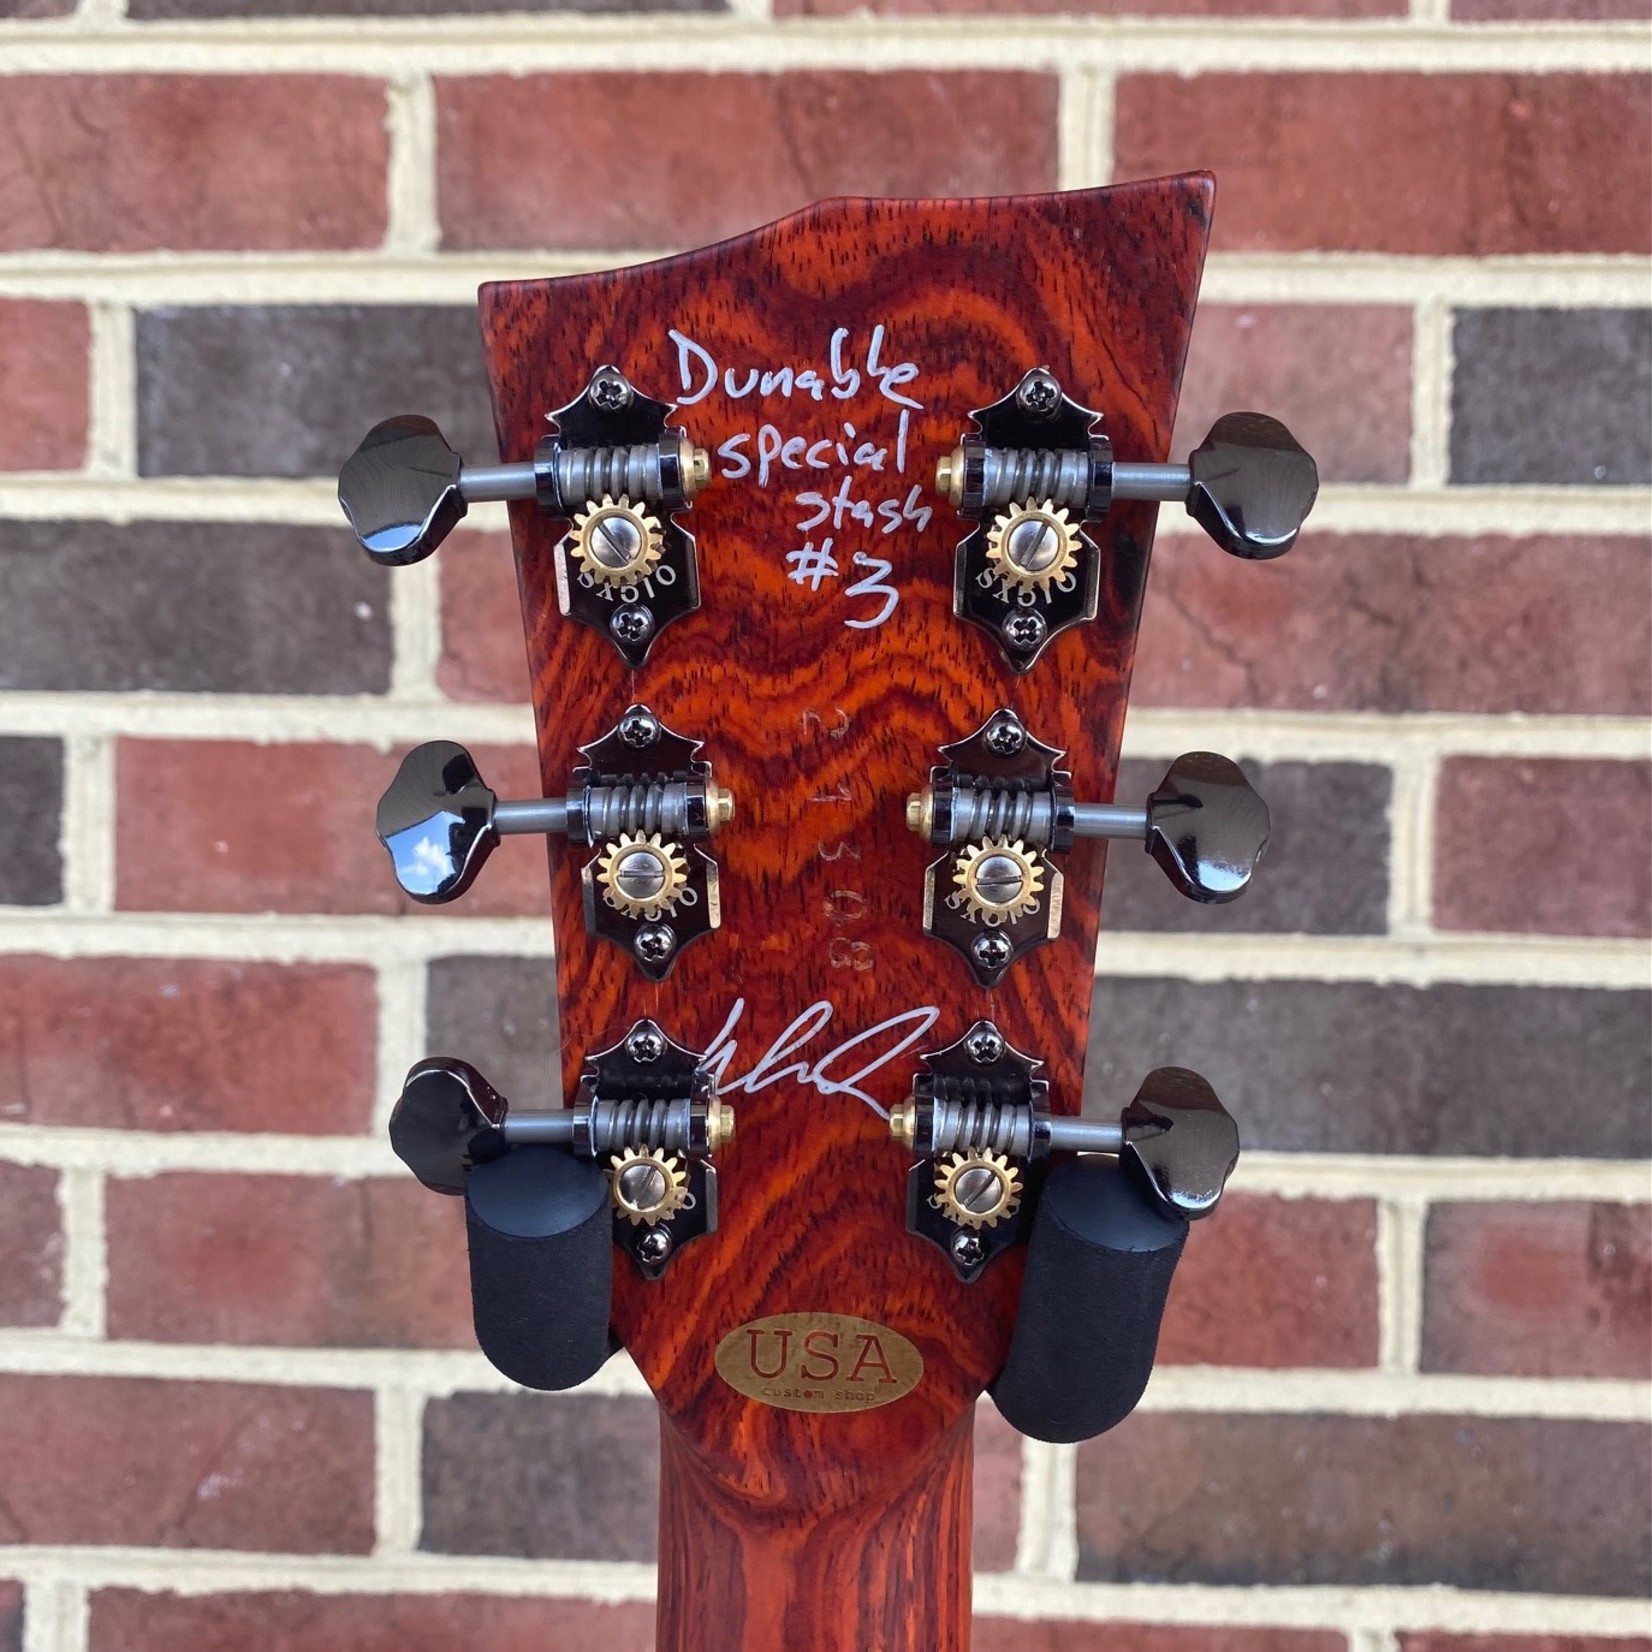 Dunable Guitars Dunable Guitars USA Special Stash #3 - Cyclops, One Piece Buckeye Burl Top w/ Gold Sparkle Resin Fill, Swamp Ash Body, Cocobolo Neck, Cocobolo Fretboard, Hardshell Case